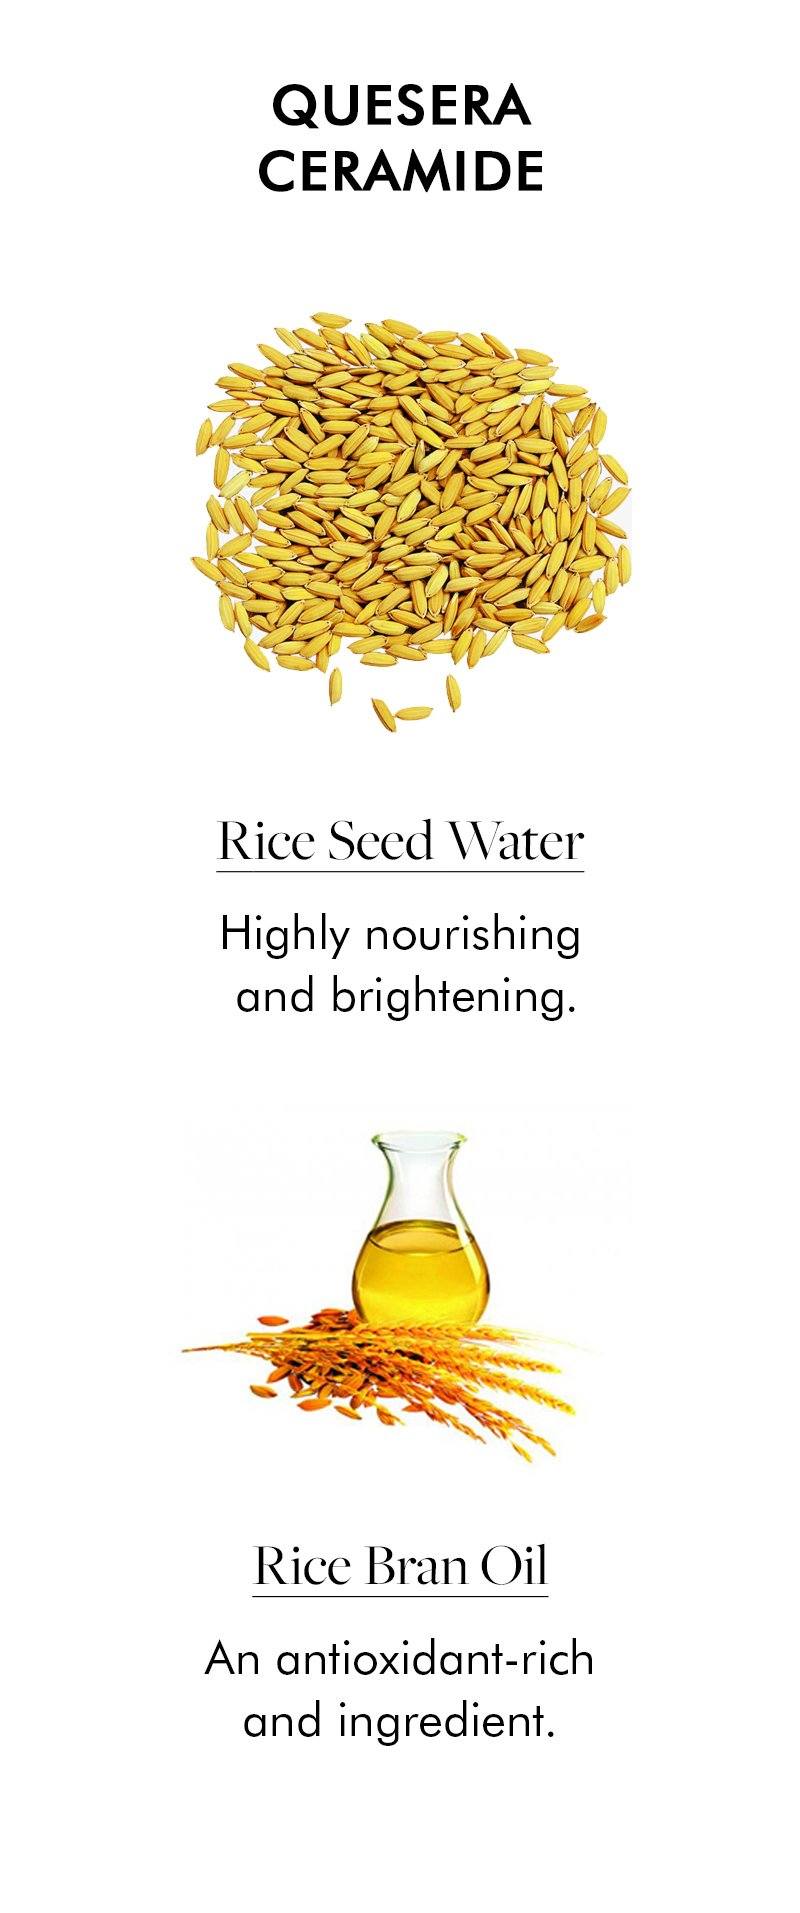 quesera ceramide - rice seed water and rice bran oil